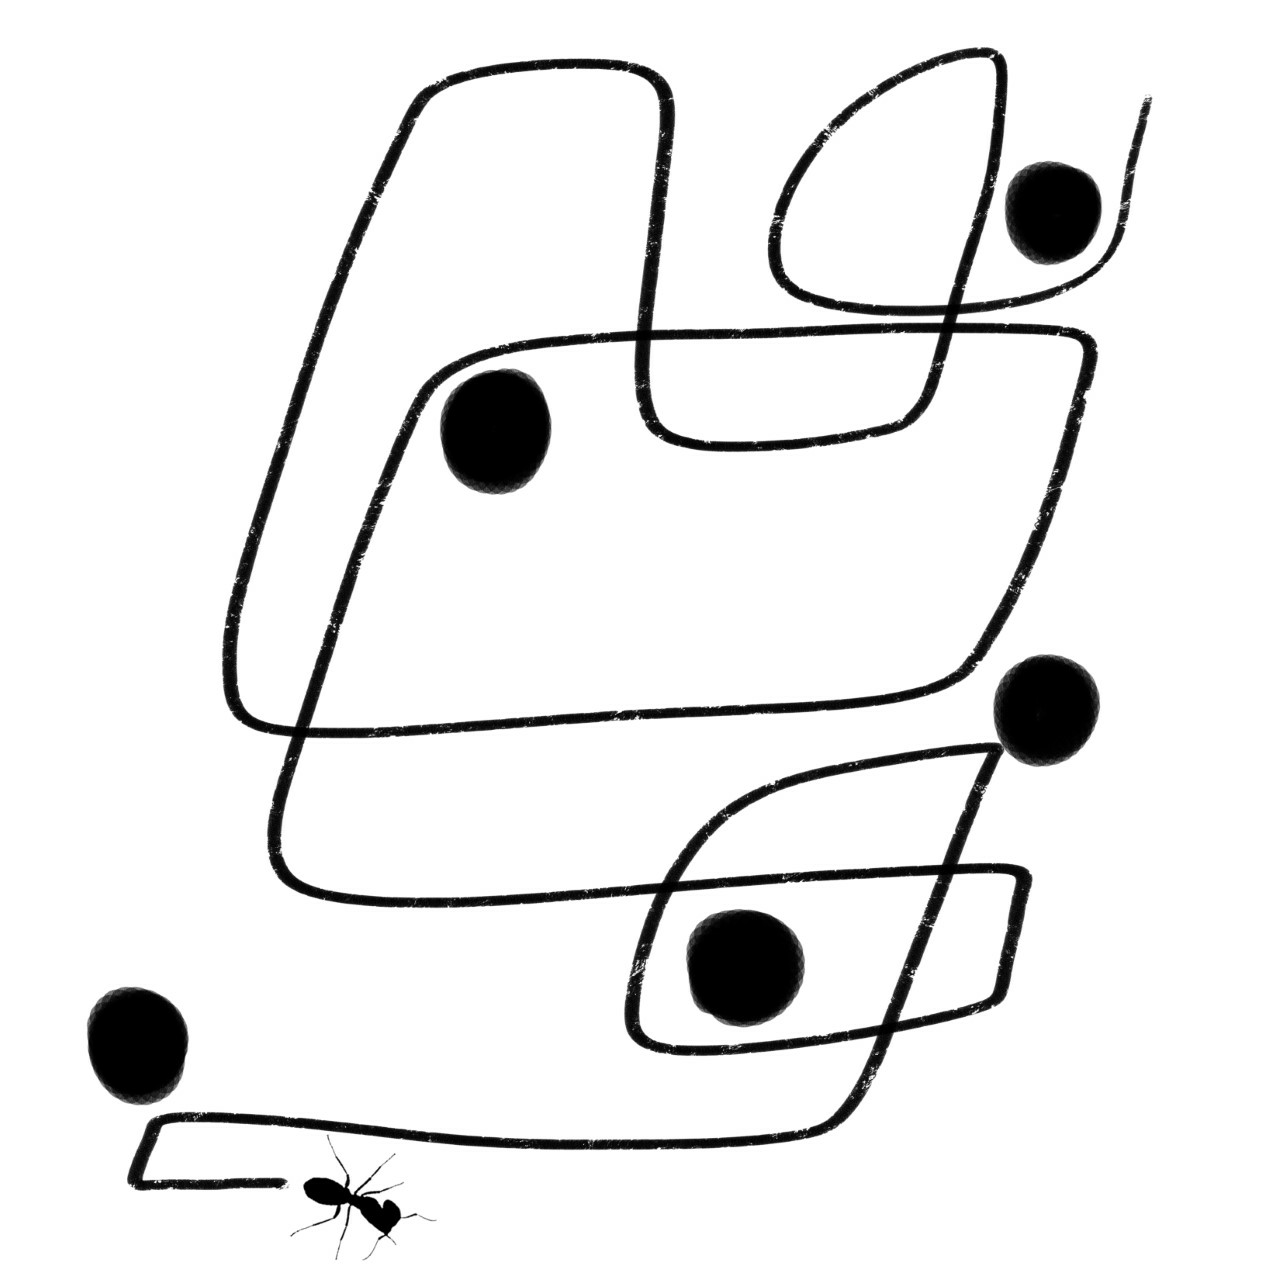 Abstract image of squiggly black lines with randomized black dots